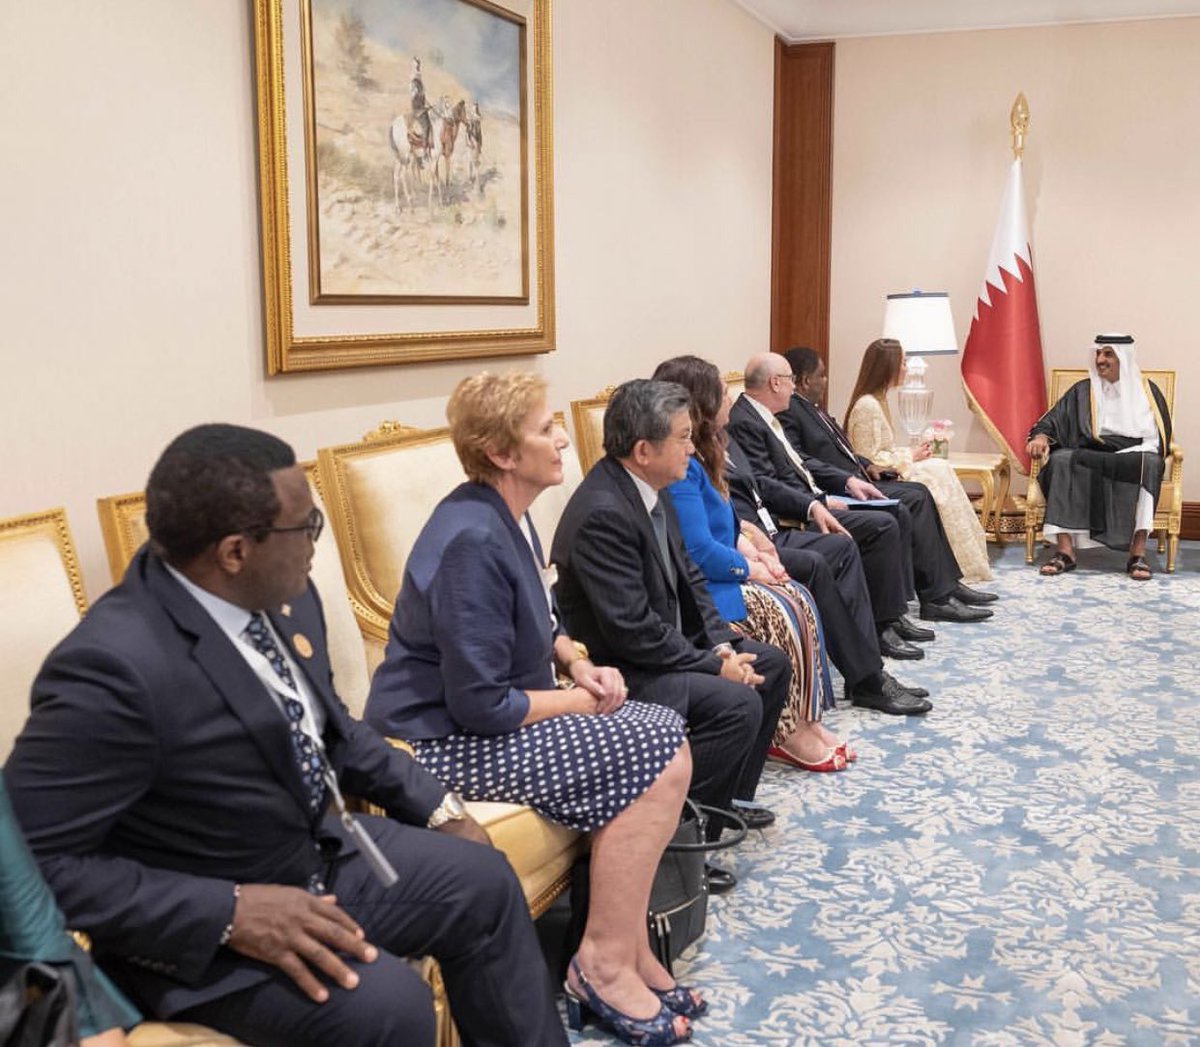 HH receives the President and members of the Executive Committee of the IPU